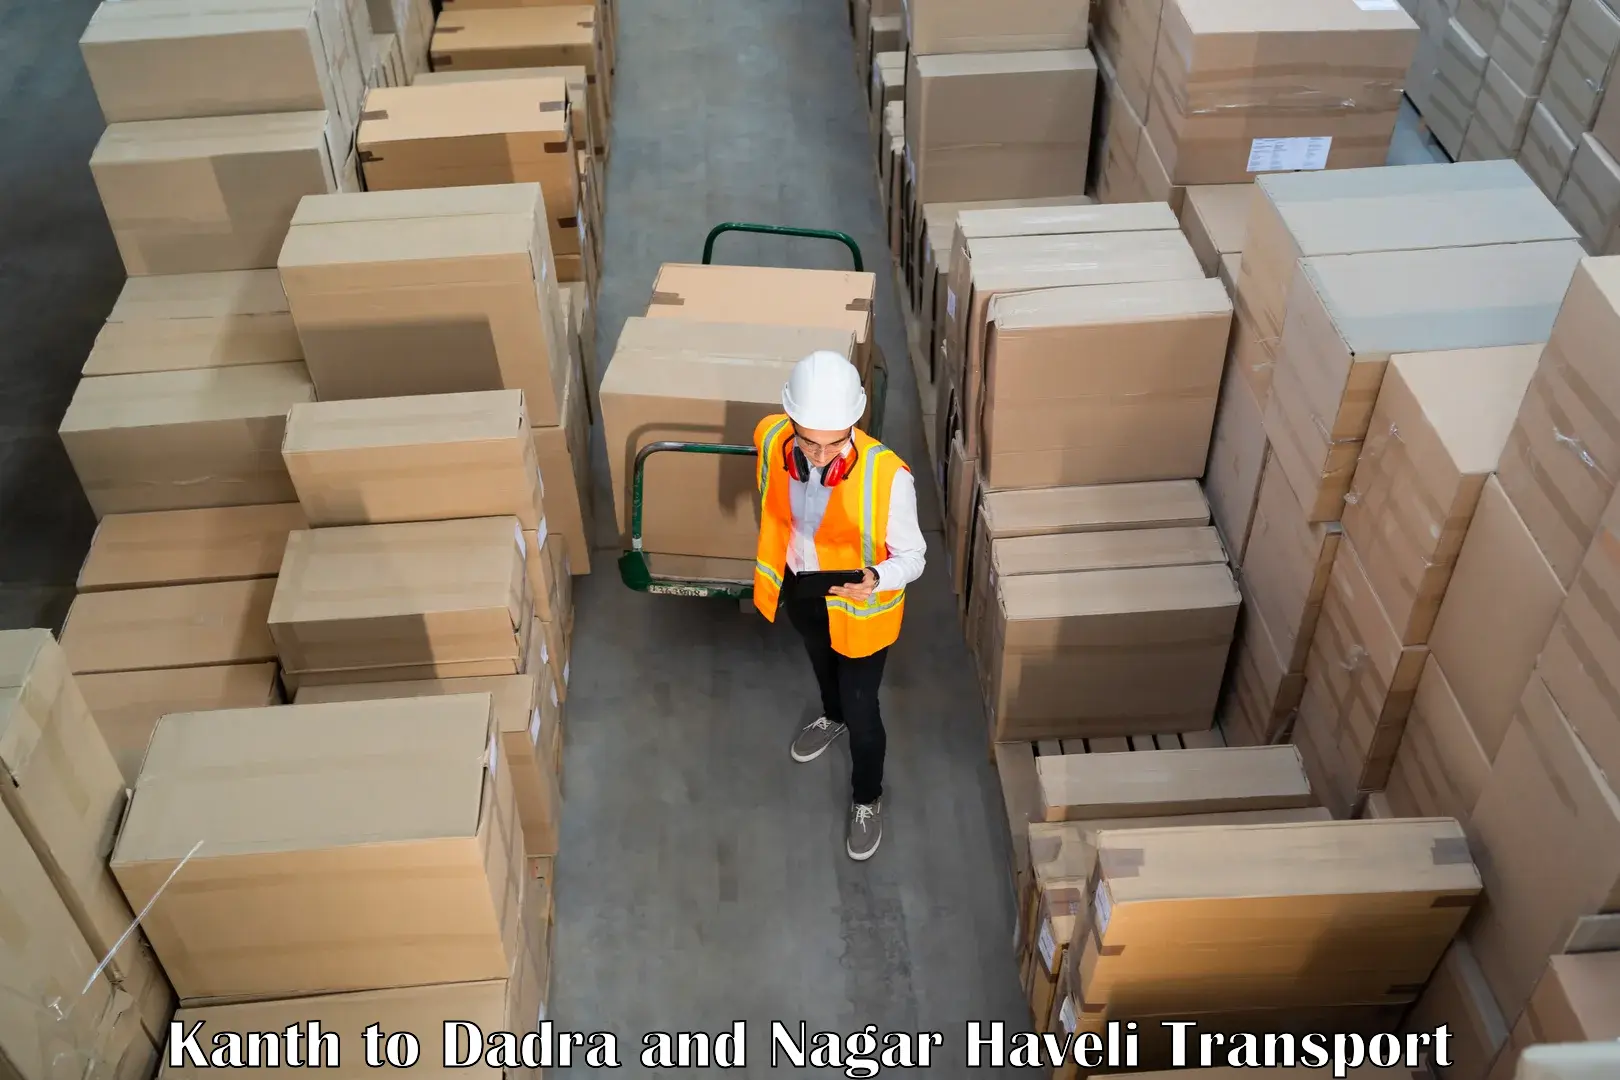 Truck transport companies in India Kanth to Dadra and Nagar Haveli